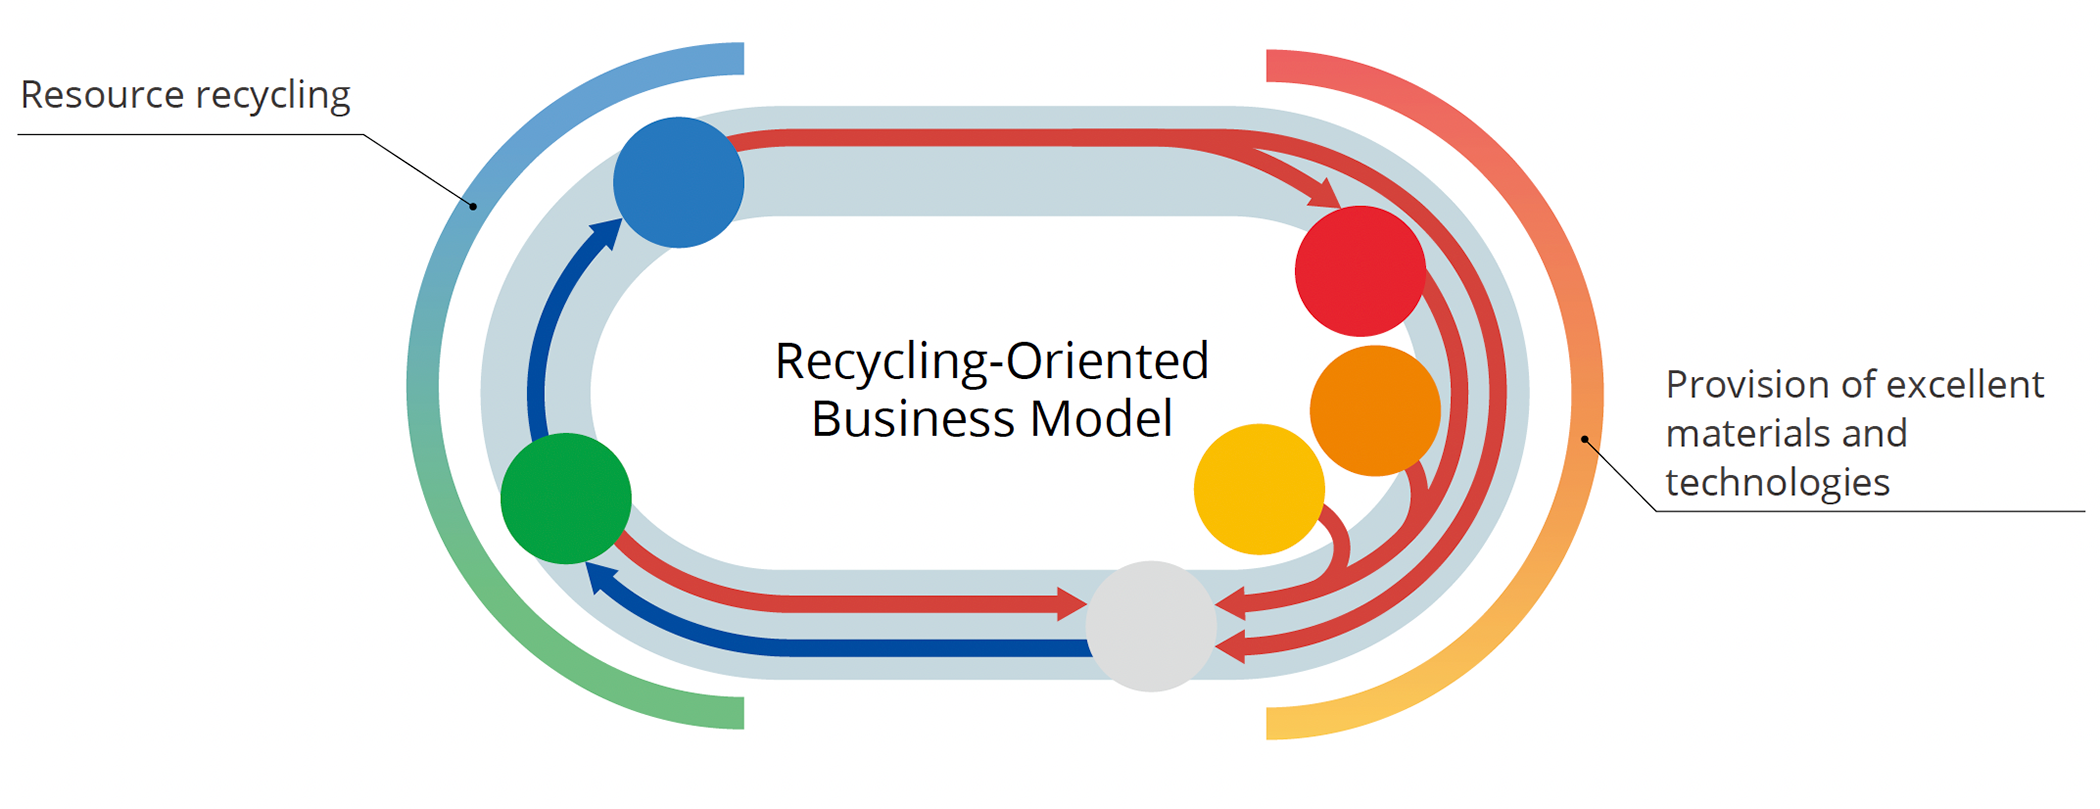 Recycling-Oriented Business Model Centered on Metals